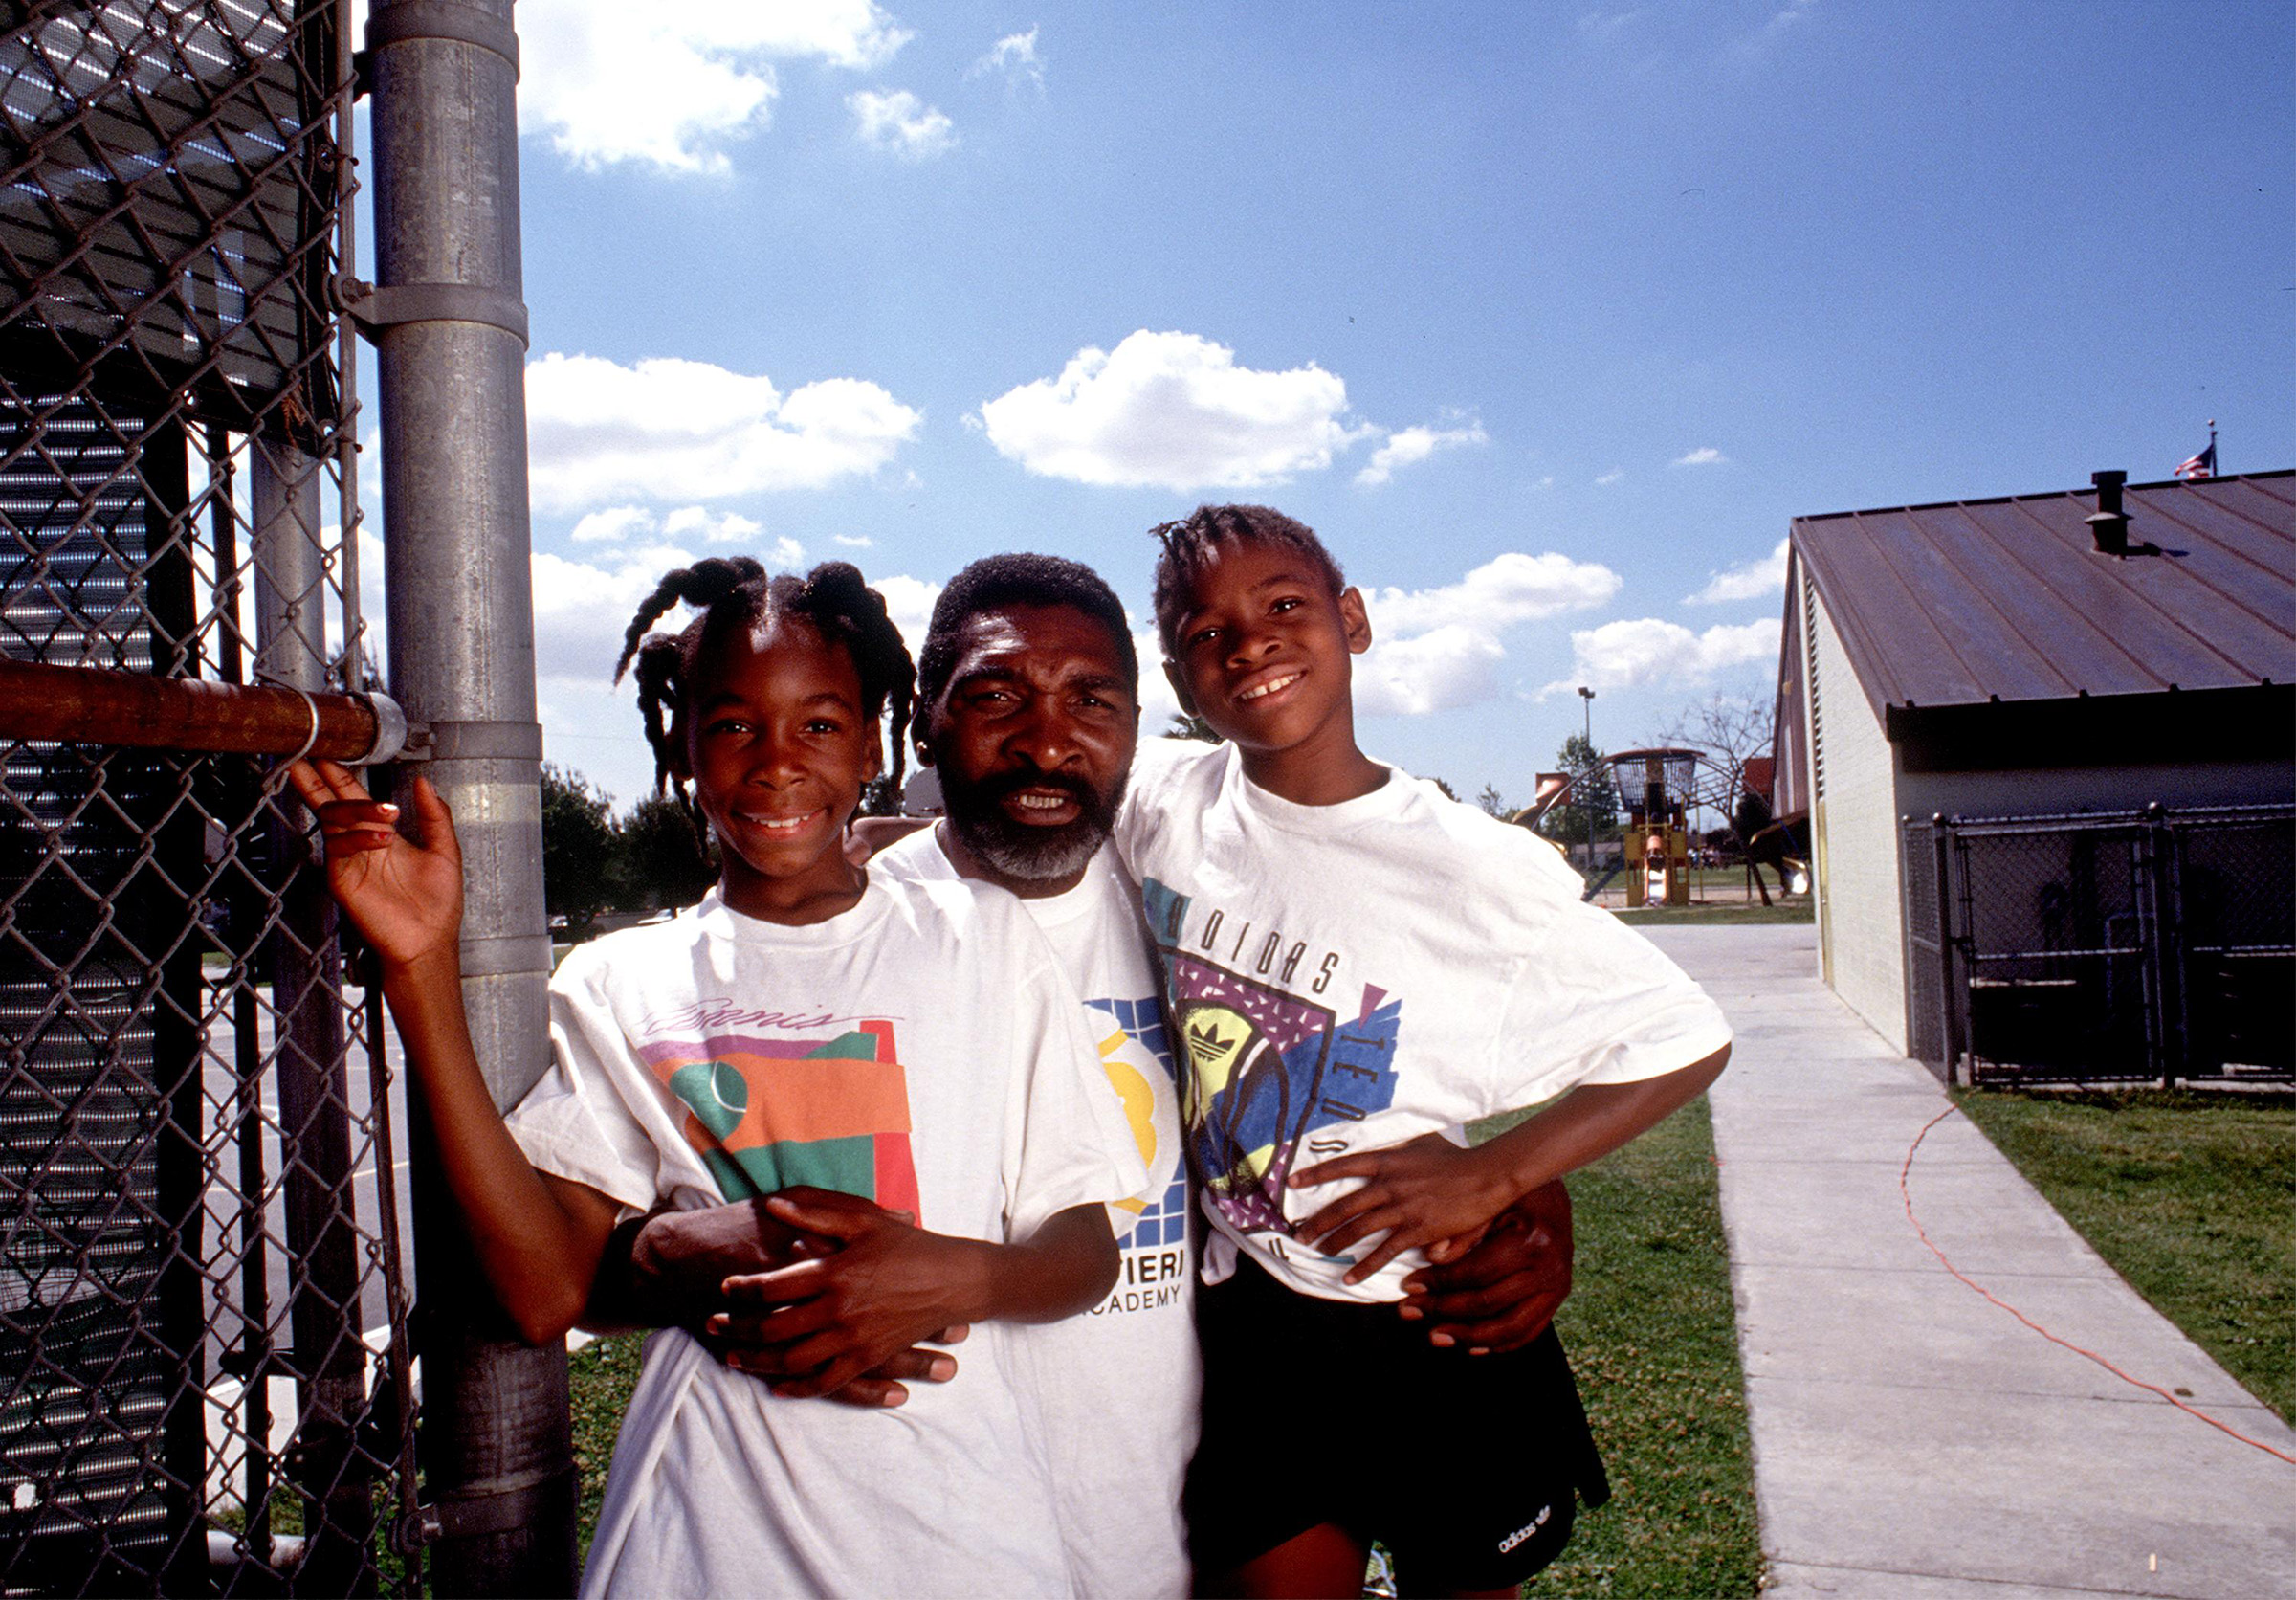 Richard Williams with daughters Serena, right, and Venus in 1991 in Compton, Calif. (Paul Harris—Online USA/Getty Images)